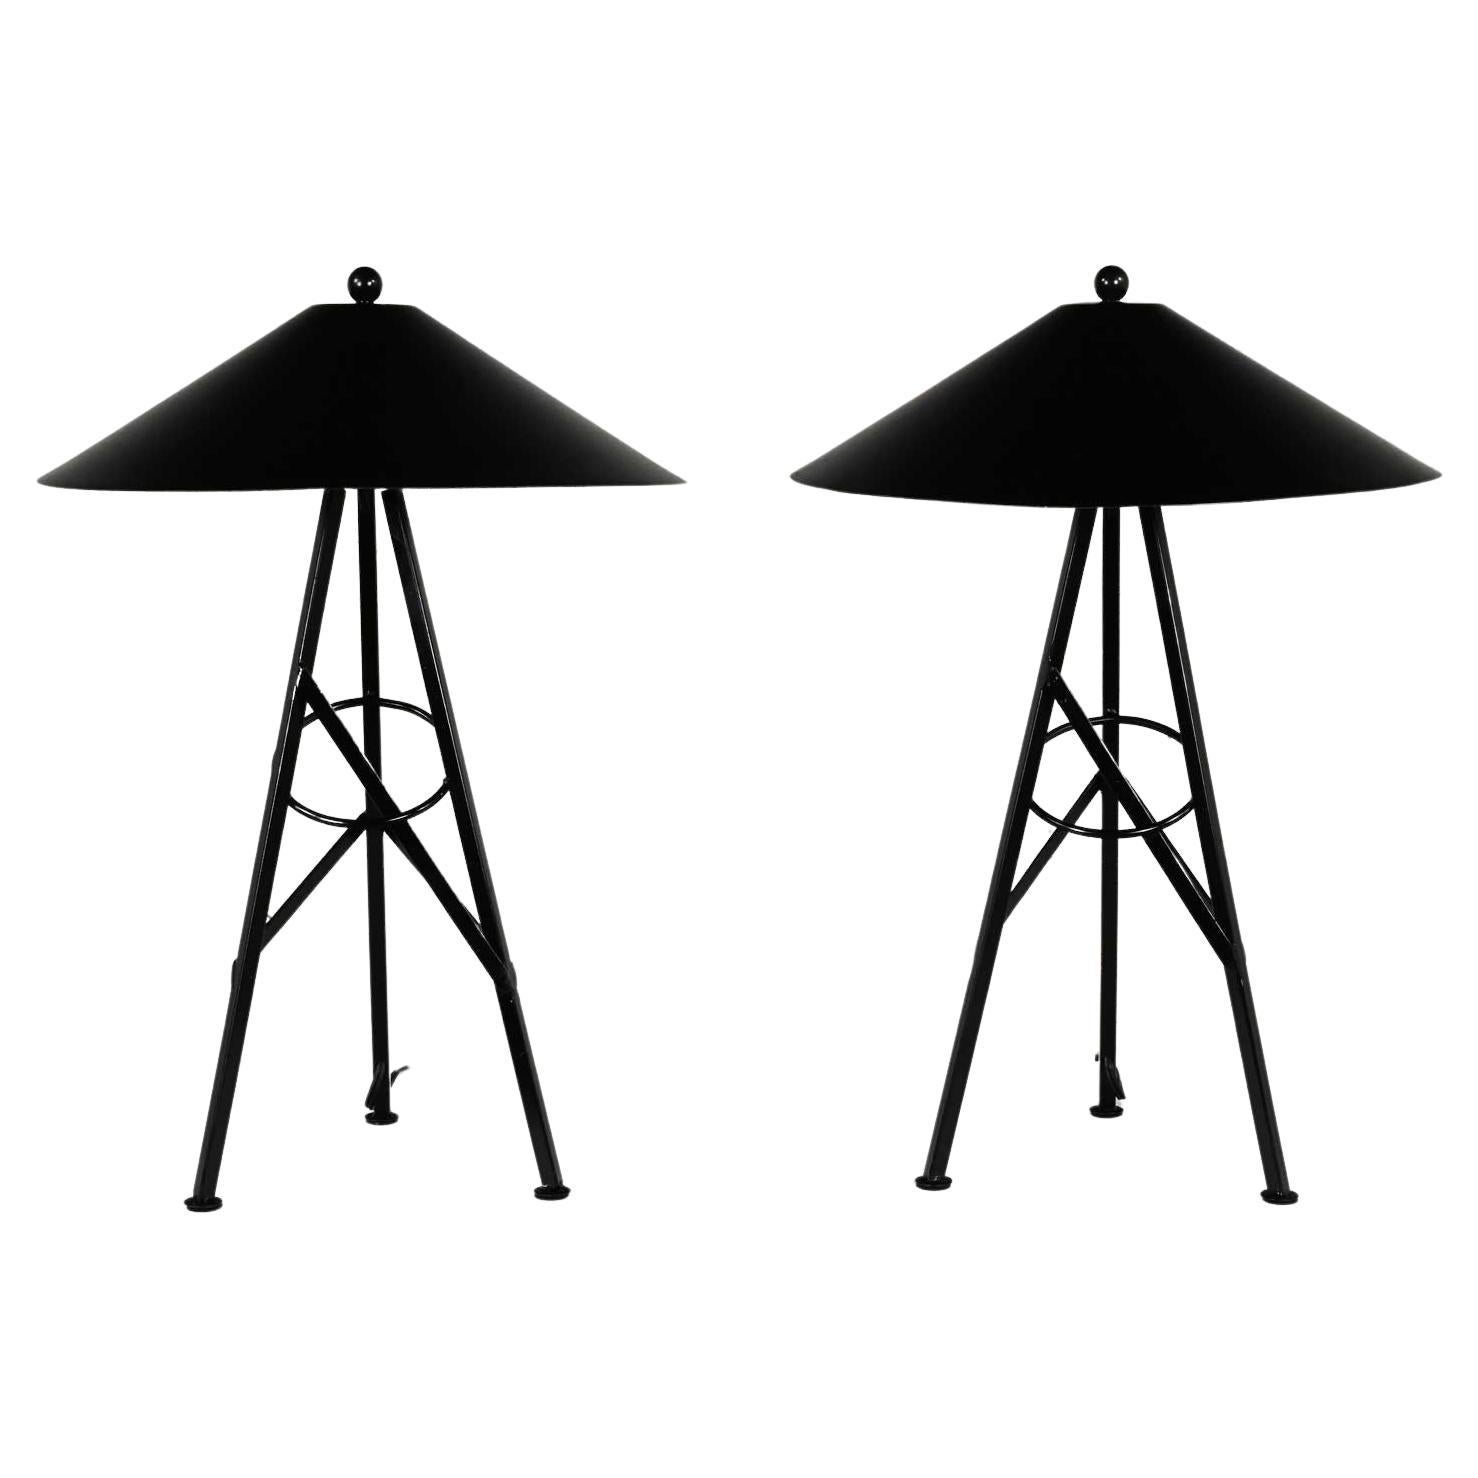 Late 20th Modern to Postmodern Metal Tri Leg Table Lamps Aluminum Coolie Shades For Sale